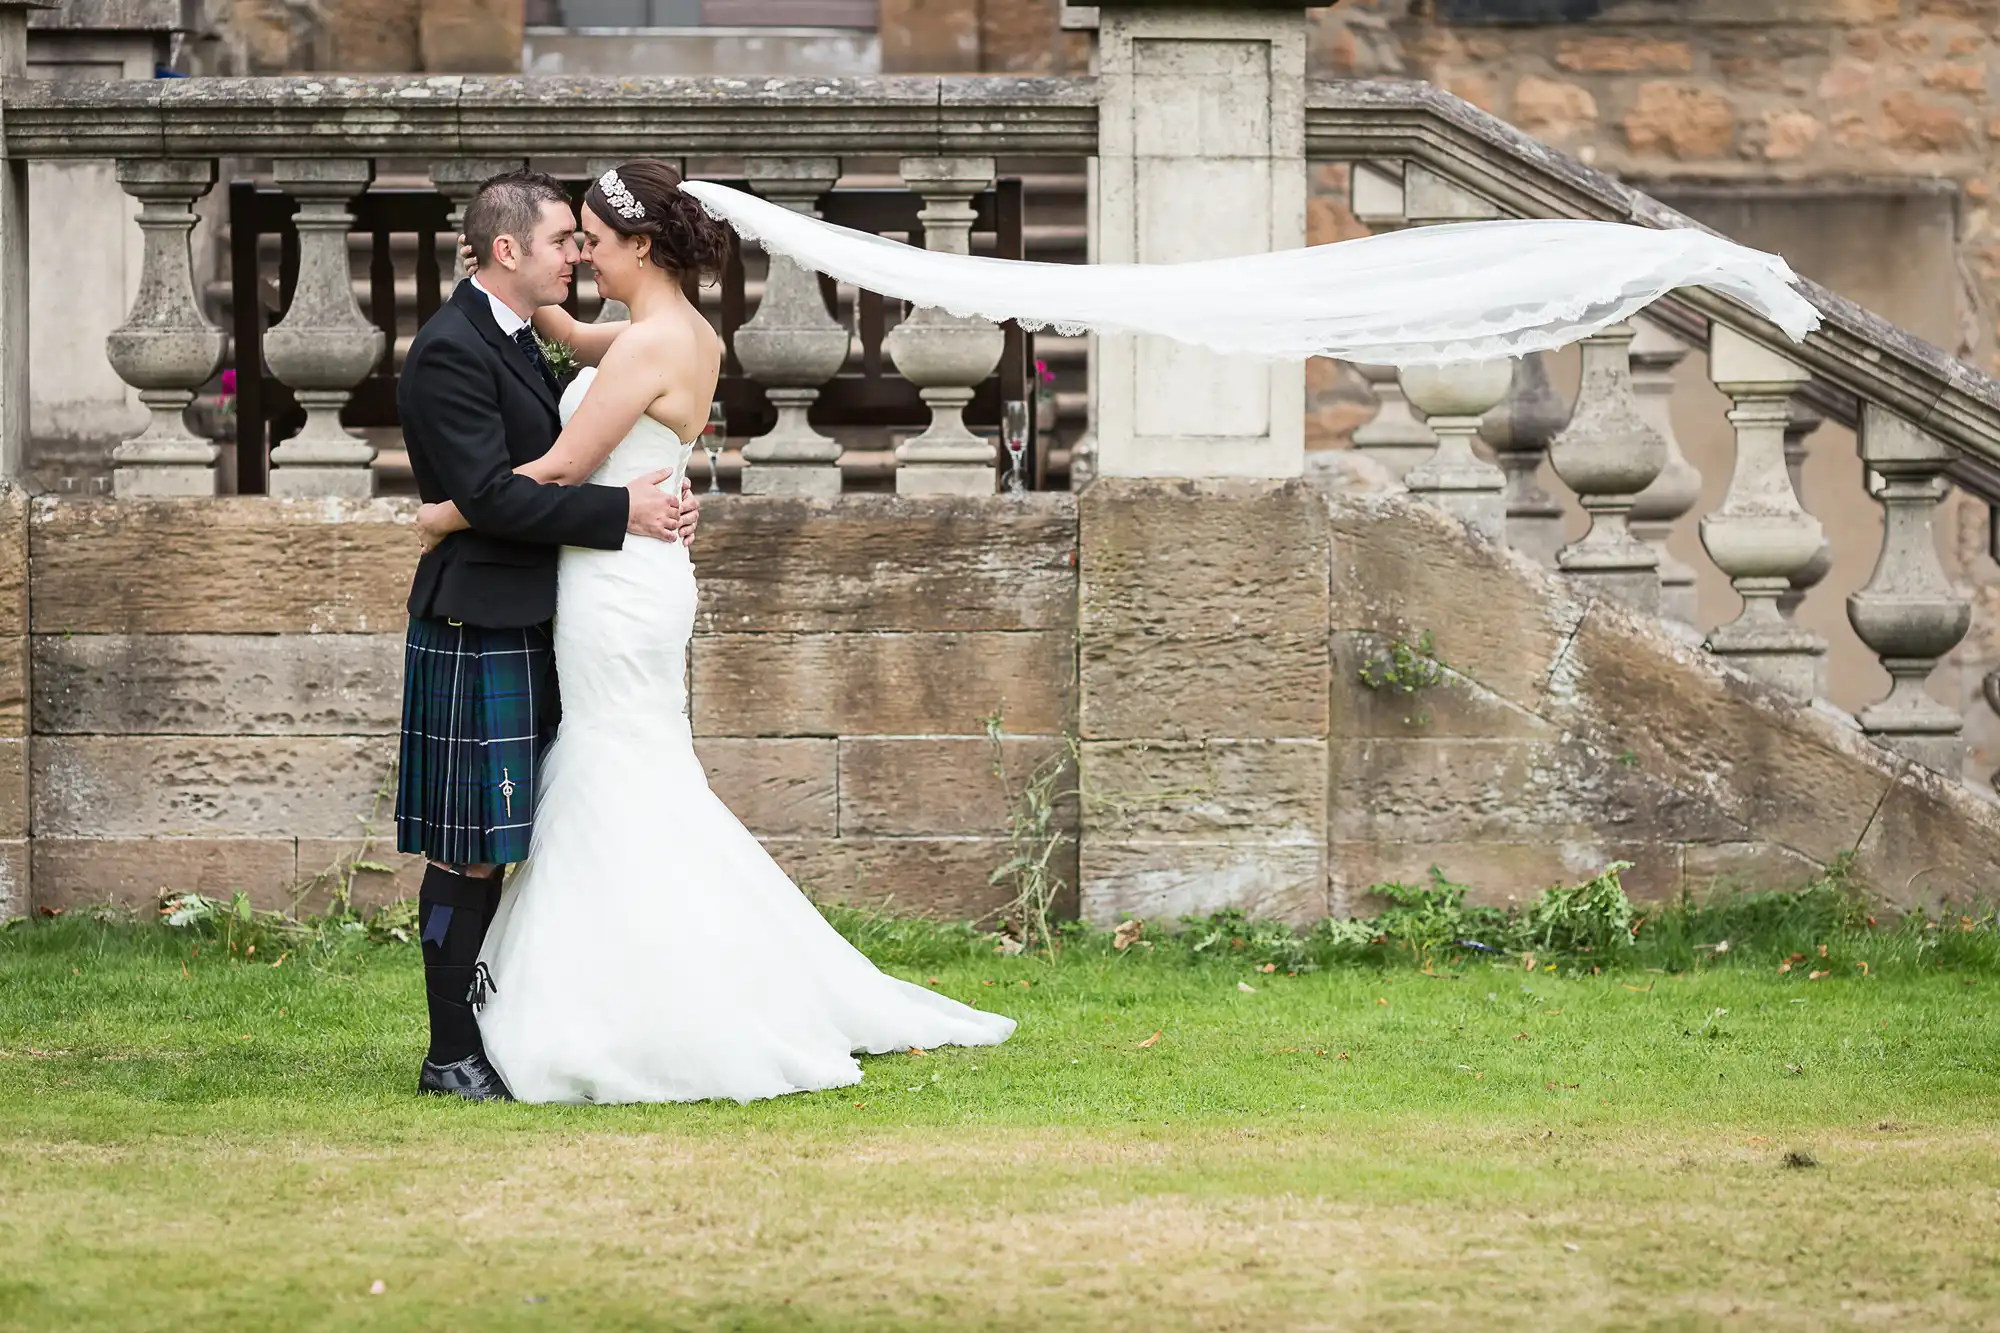 Bride in a white dress and groom in a kilt kissing, with the bride's veil blowing in the wind, standing next to a stone balustrade.